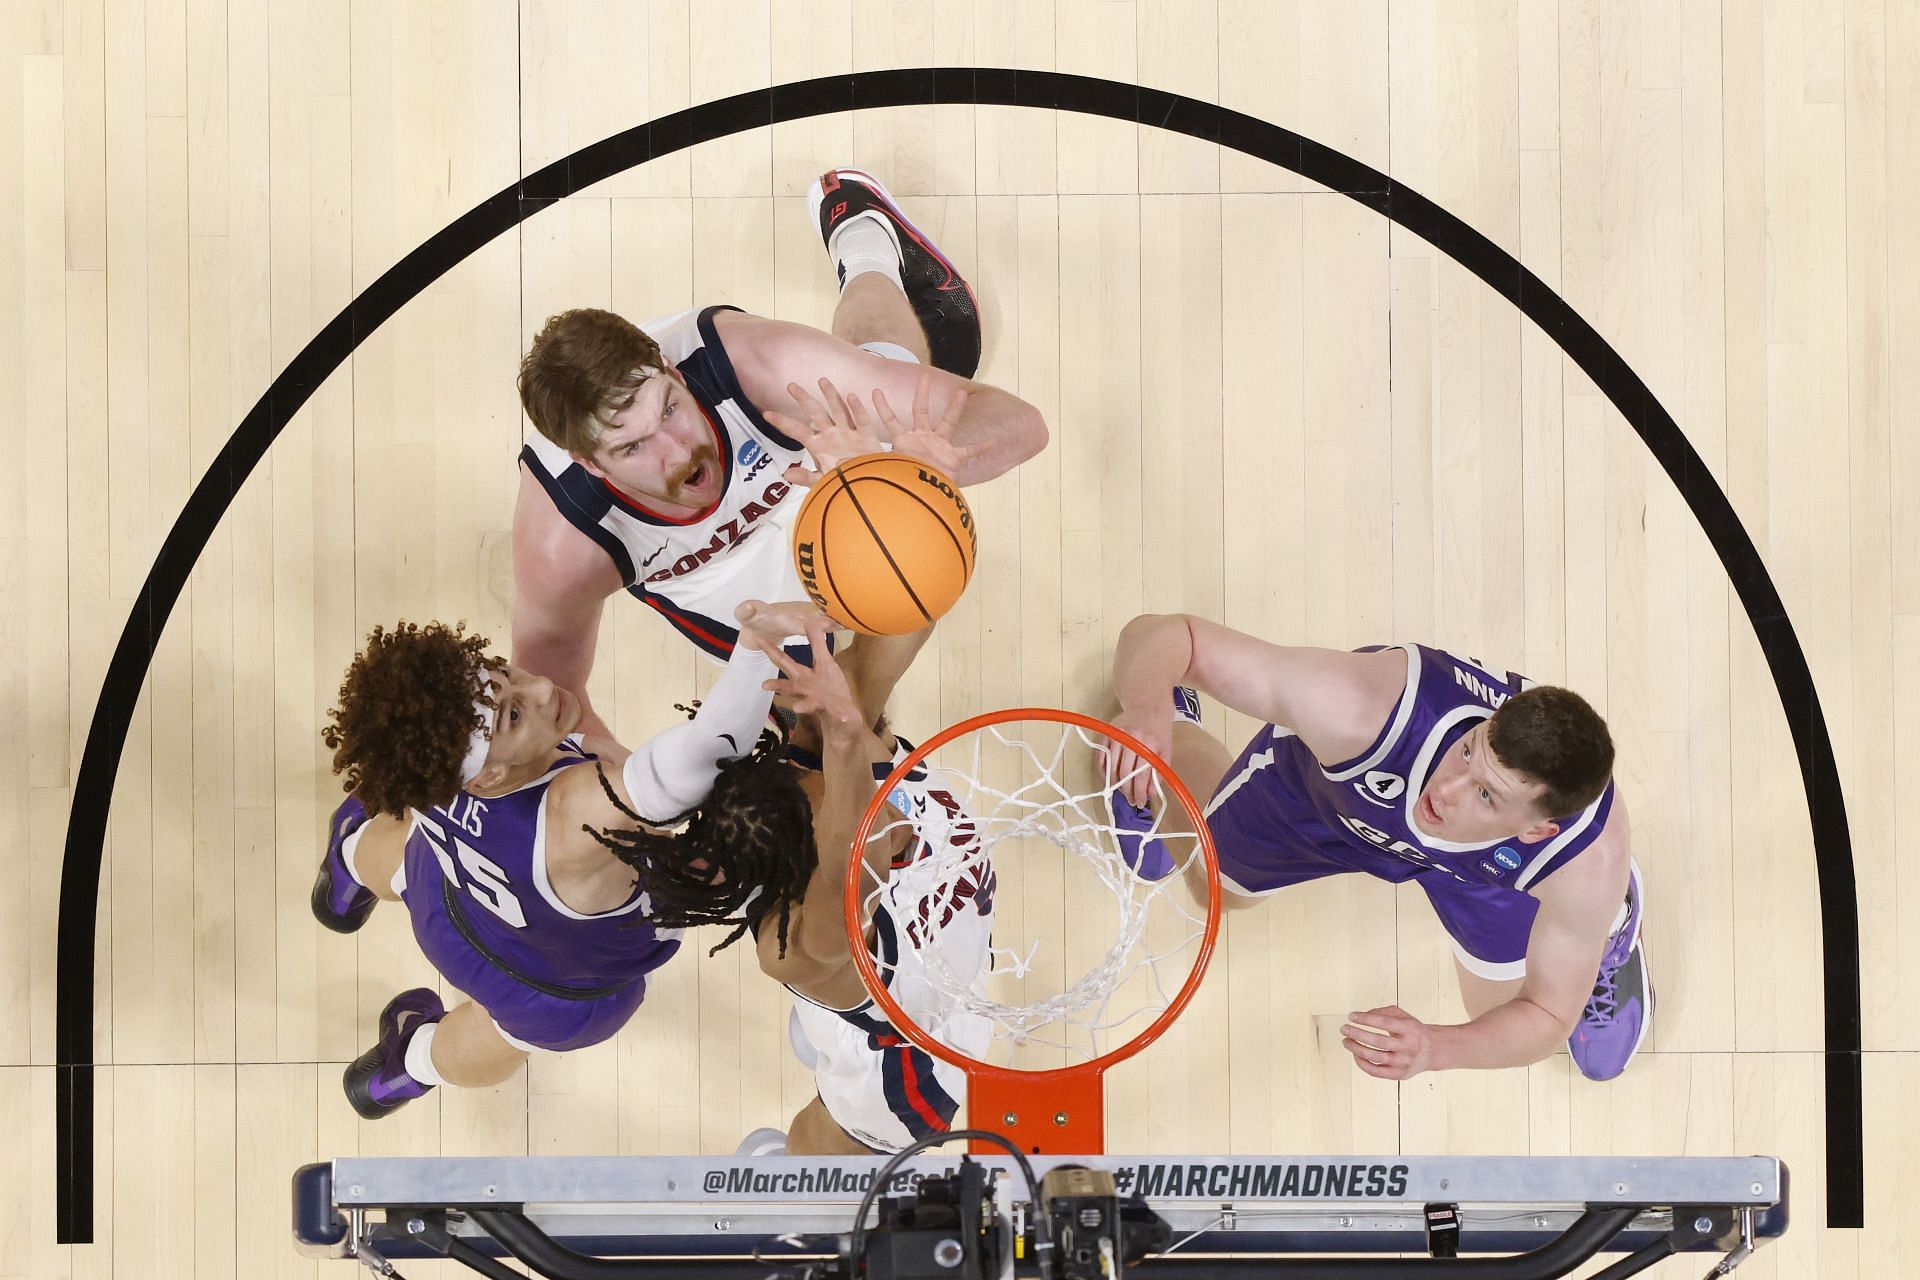 Grand Canyon, shown here battling Gonzaga a year ago, could be an NCAA Tournament sleeper.